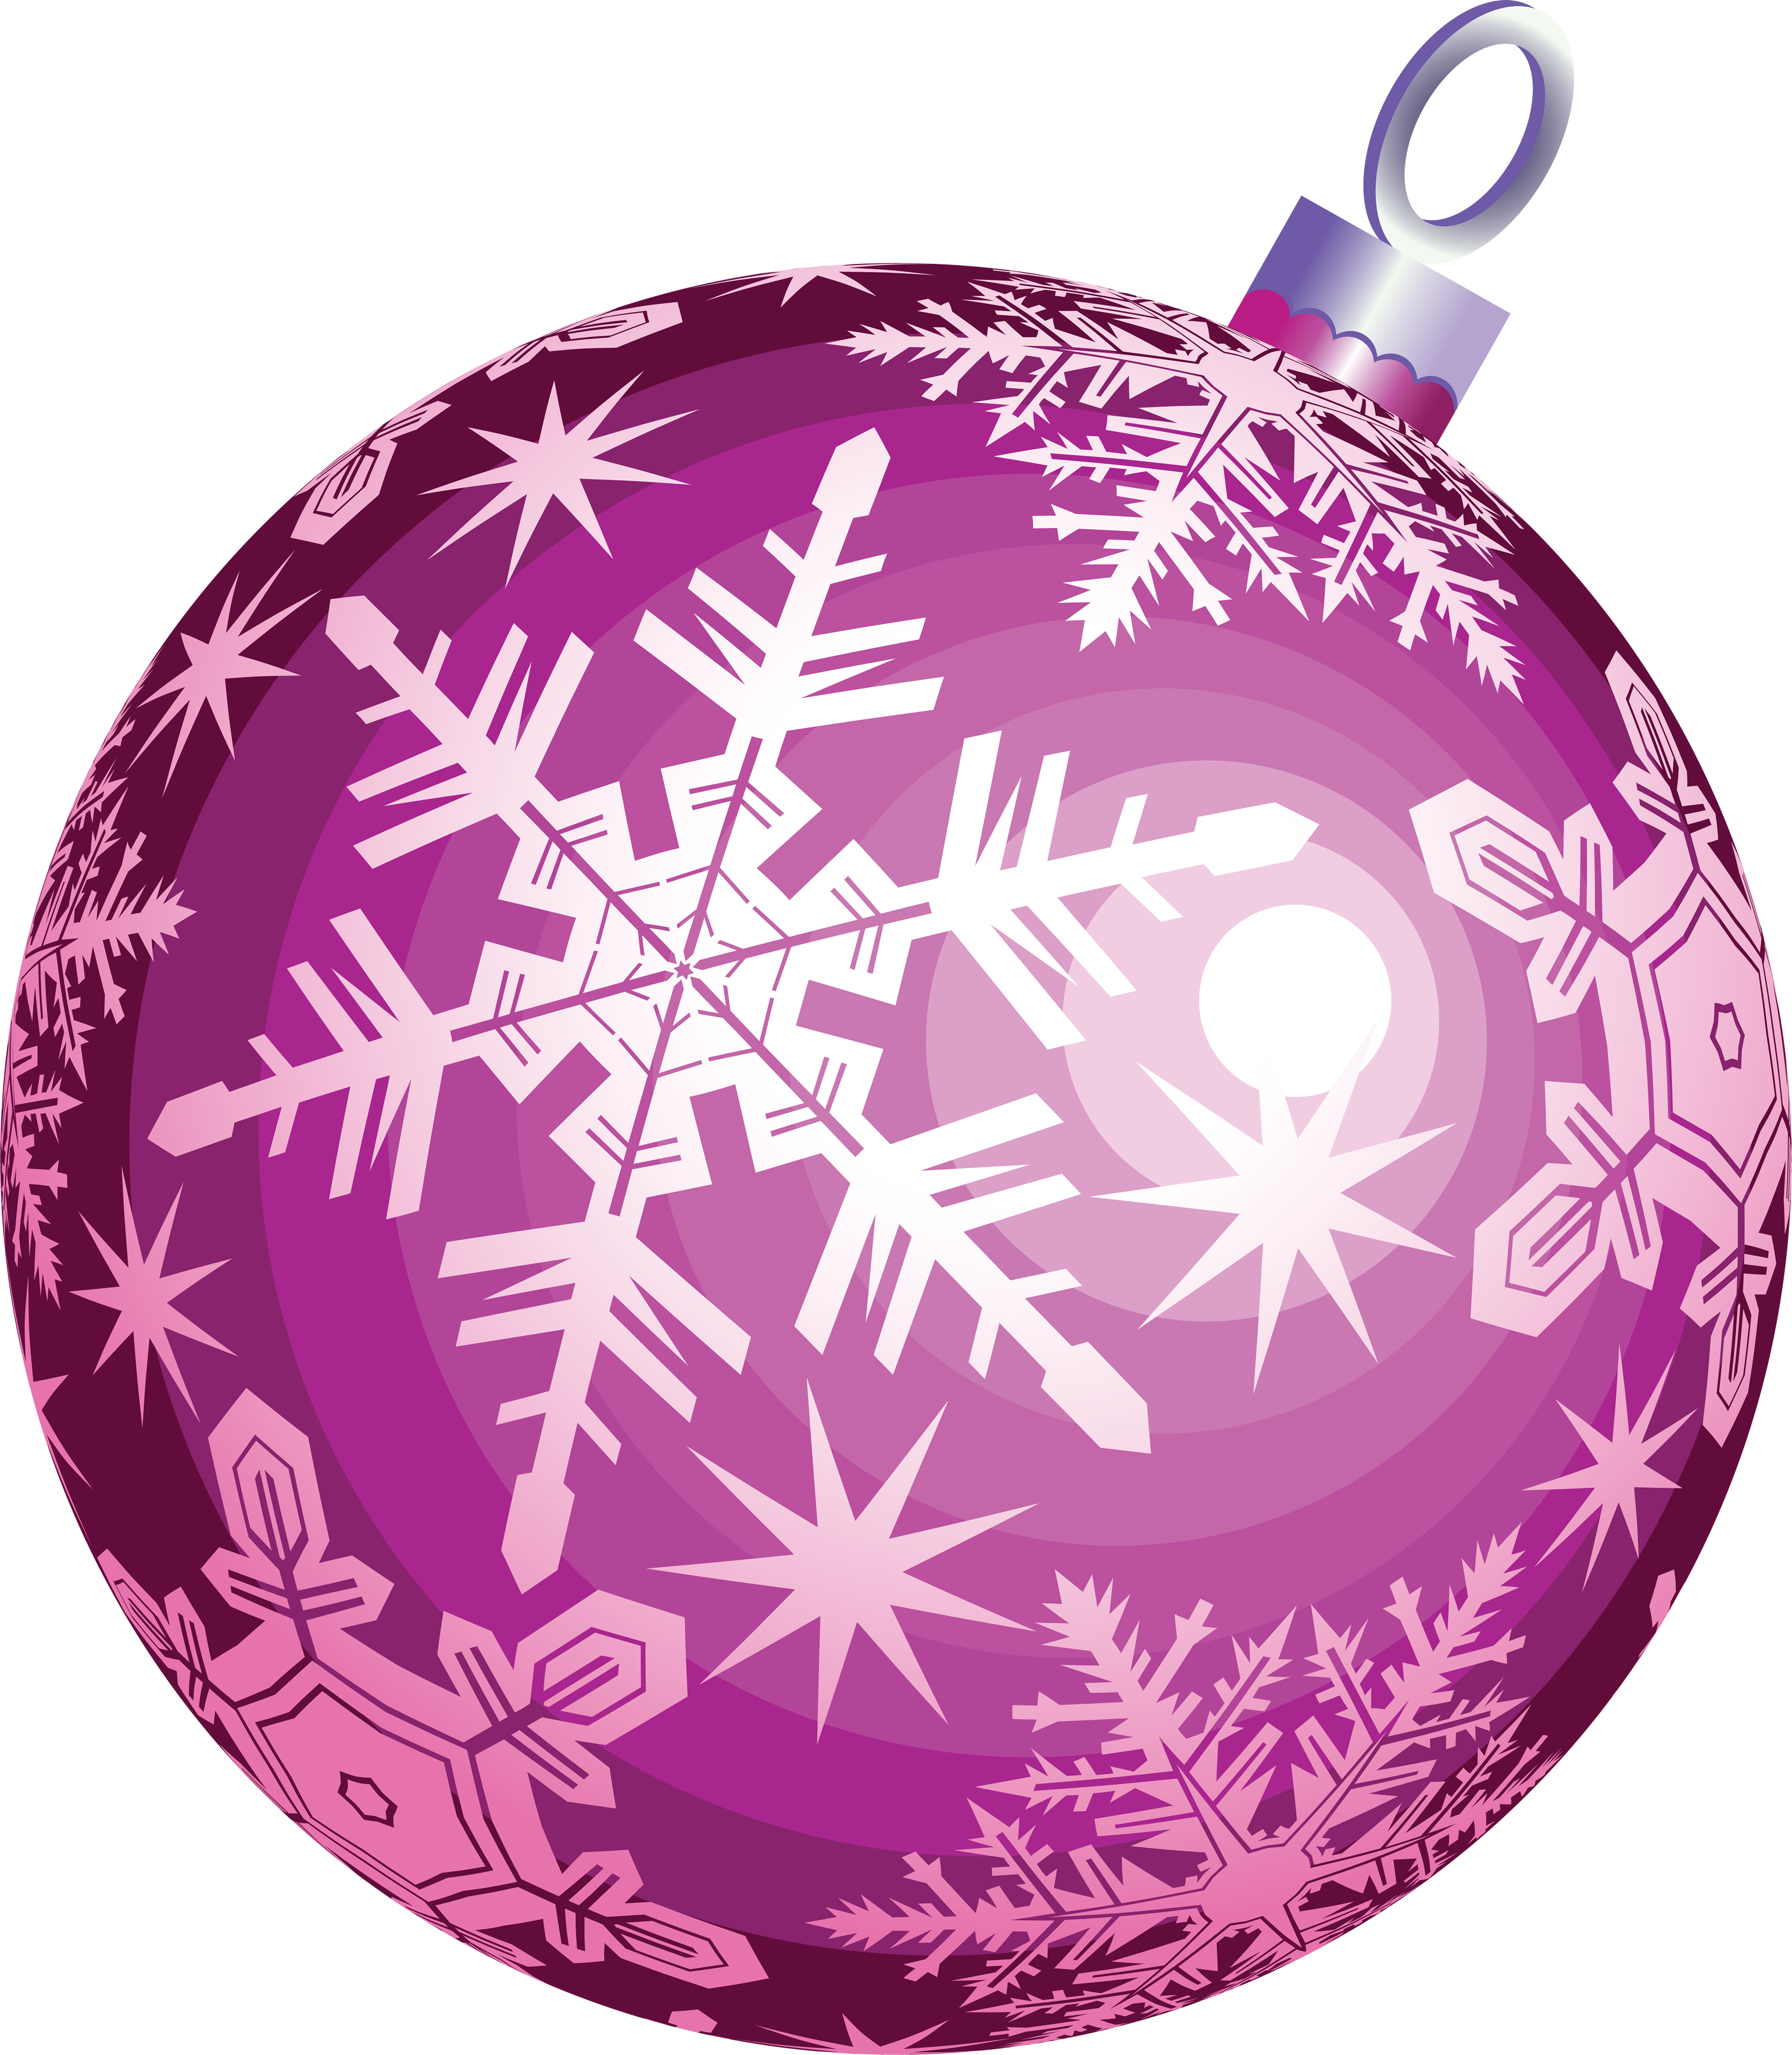 ornaments clipart two